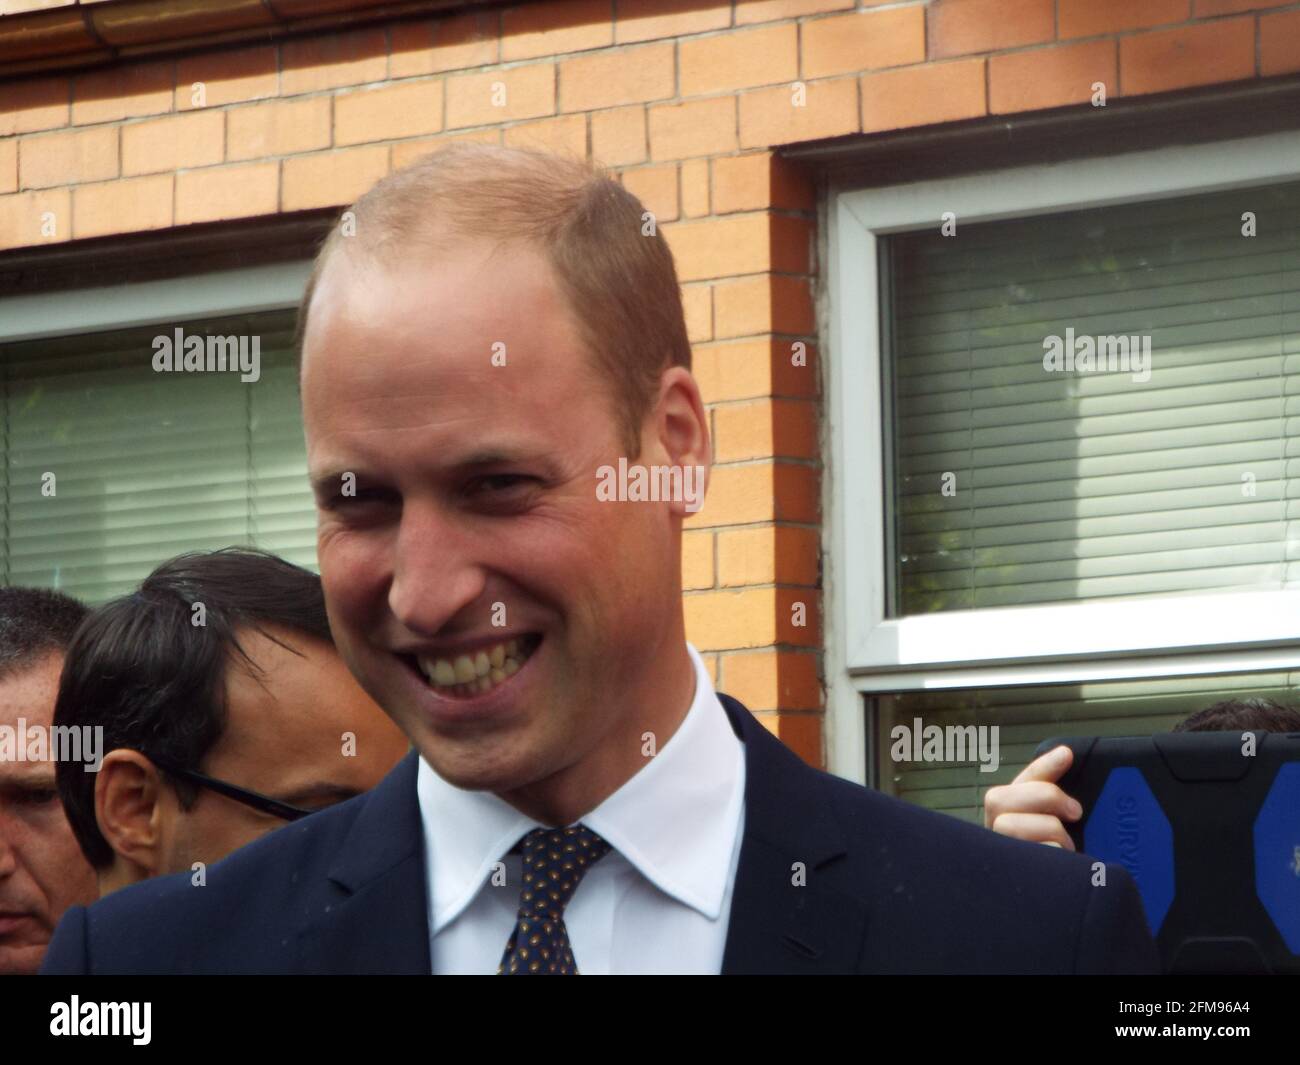 WALLASEY, ROYAUME-UNI - 15 janv. 2015: Seacombe Wallasey Wirral Merseyside royaume-uni 01/15/2015 HRH Prince William sur un walkabout à Seacombe A. Banque D'Images